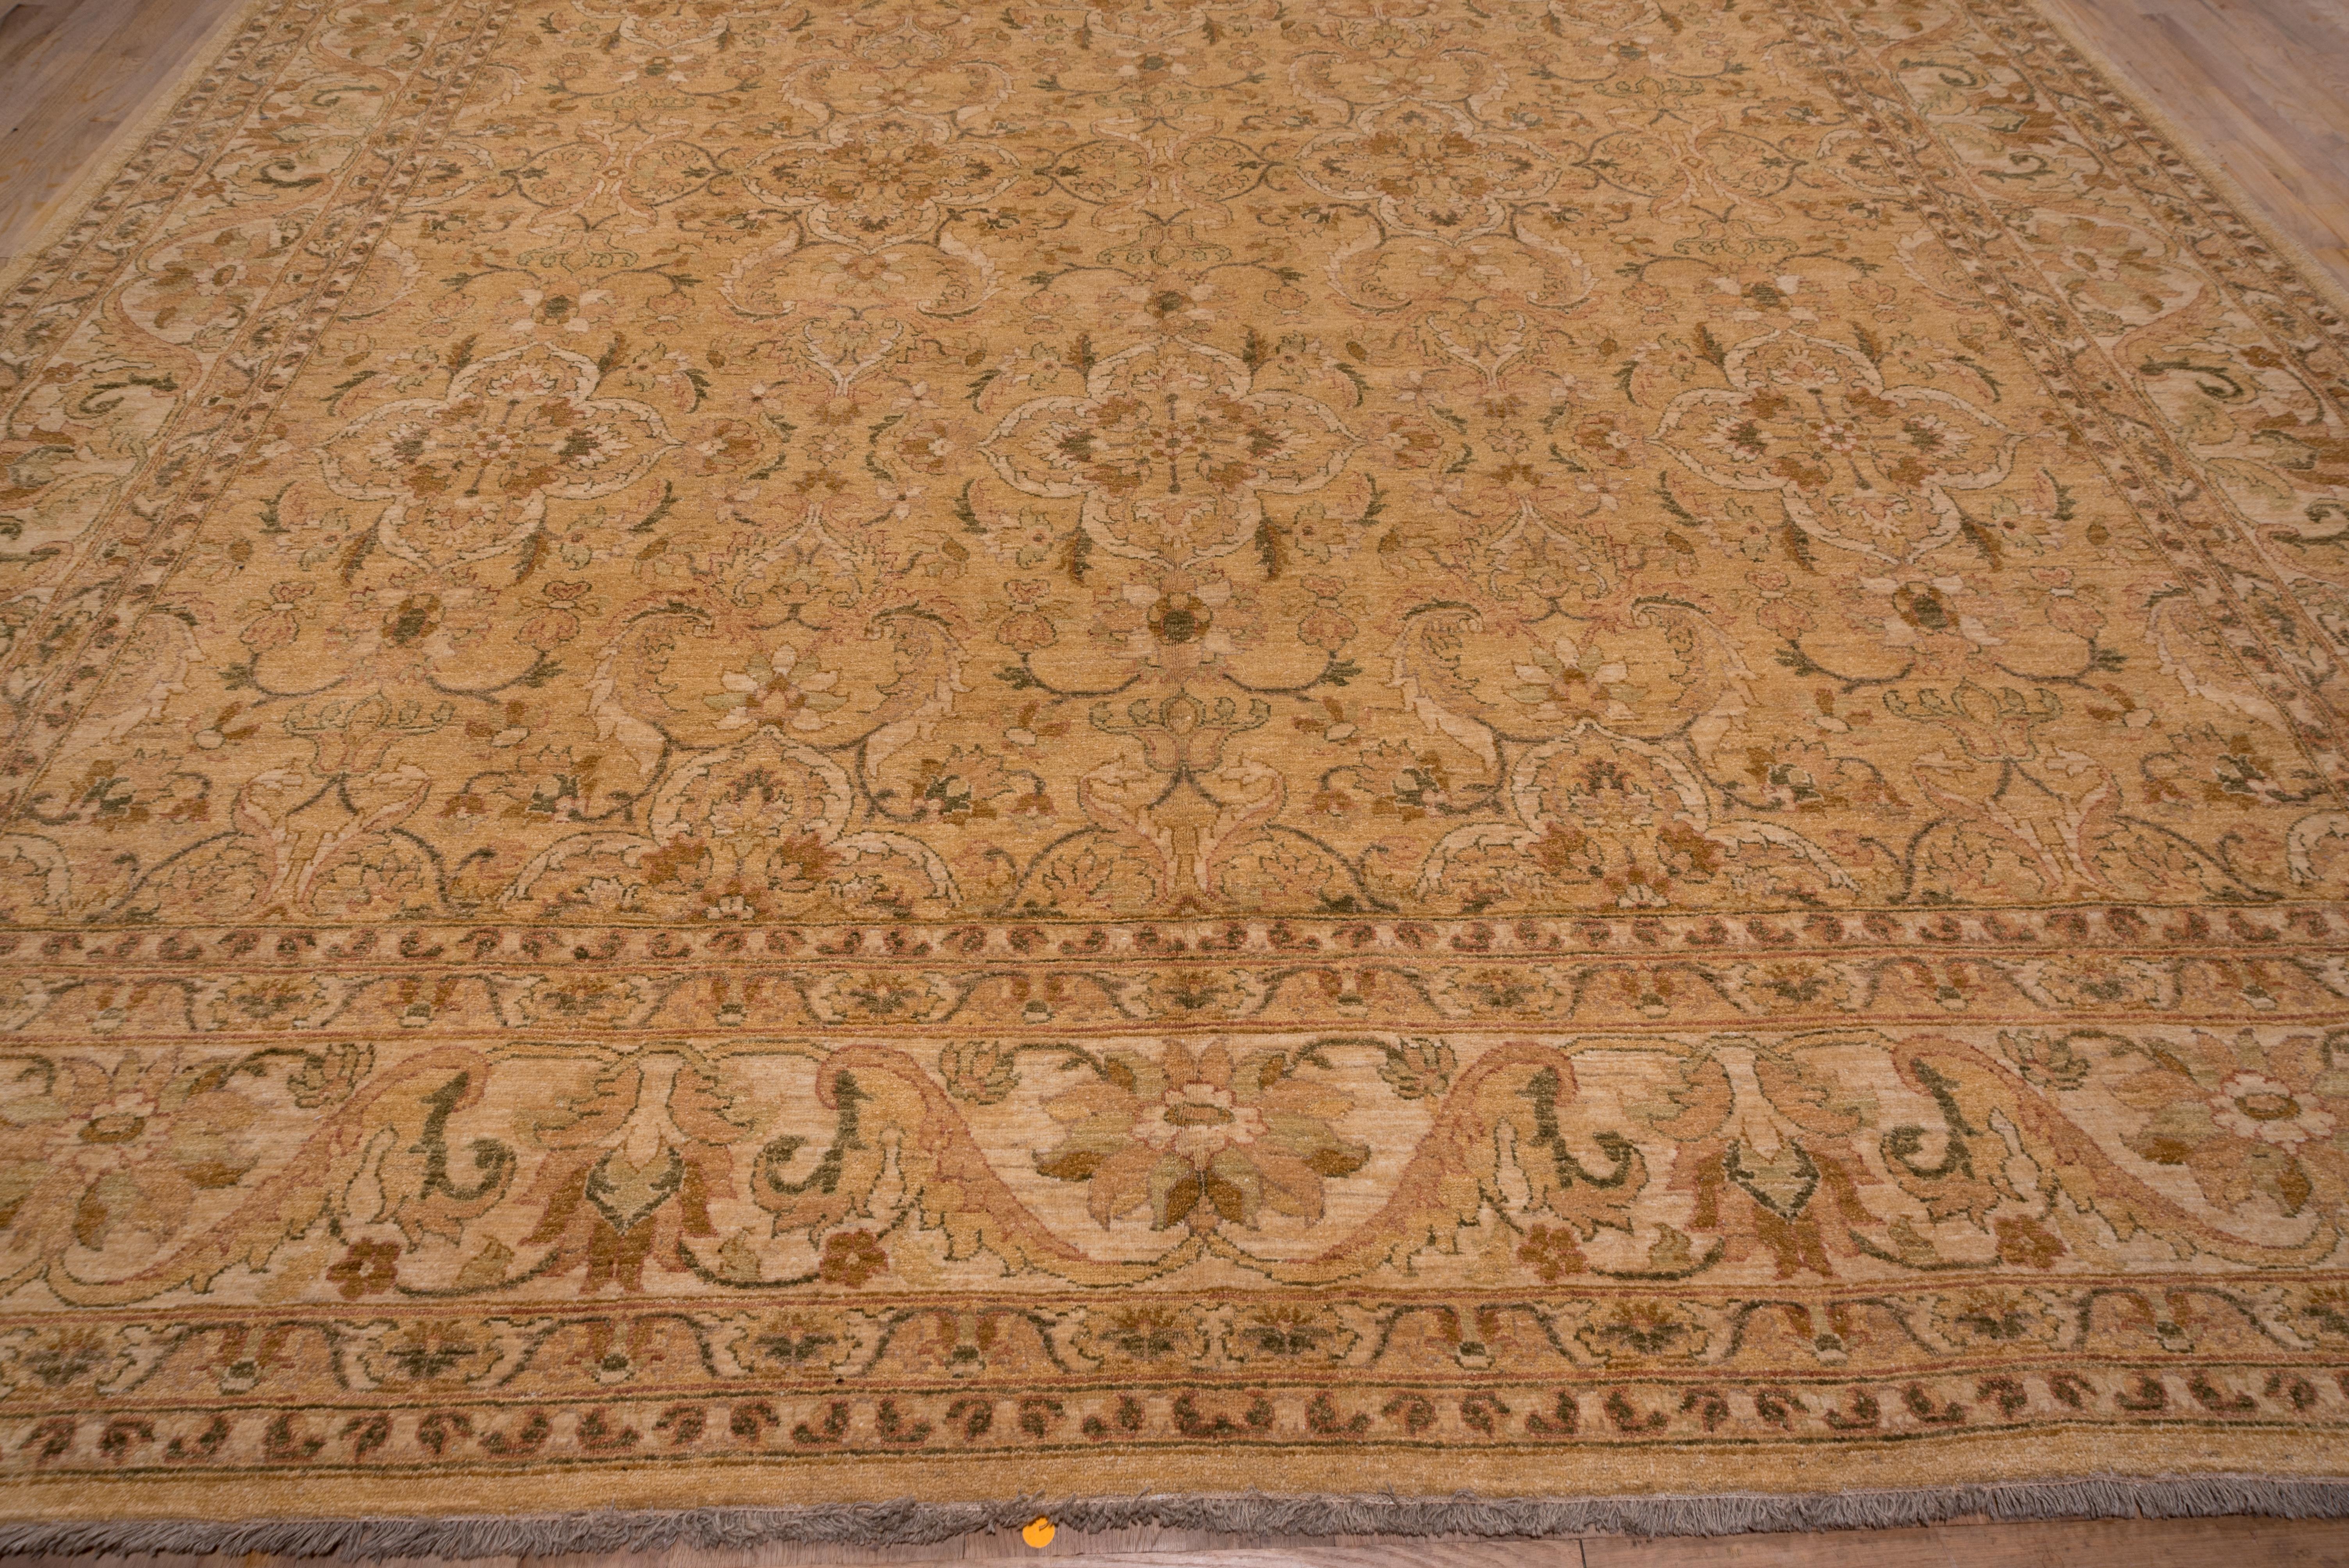 The sand field presents an all-over pattern of cruciform’s defined by forked arabesques with details in light-medium brown, framed by a cream border of split leaf arches enclosing palmettes. The general tonality is light and there are no saturated